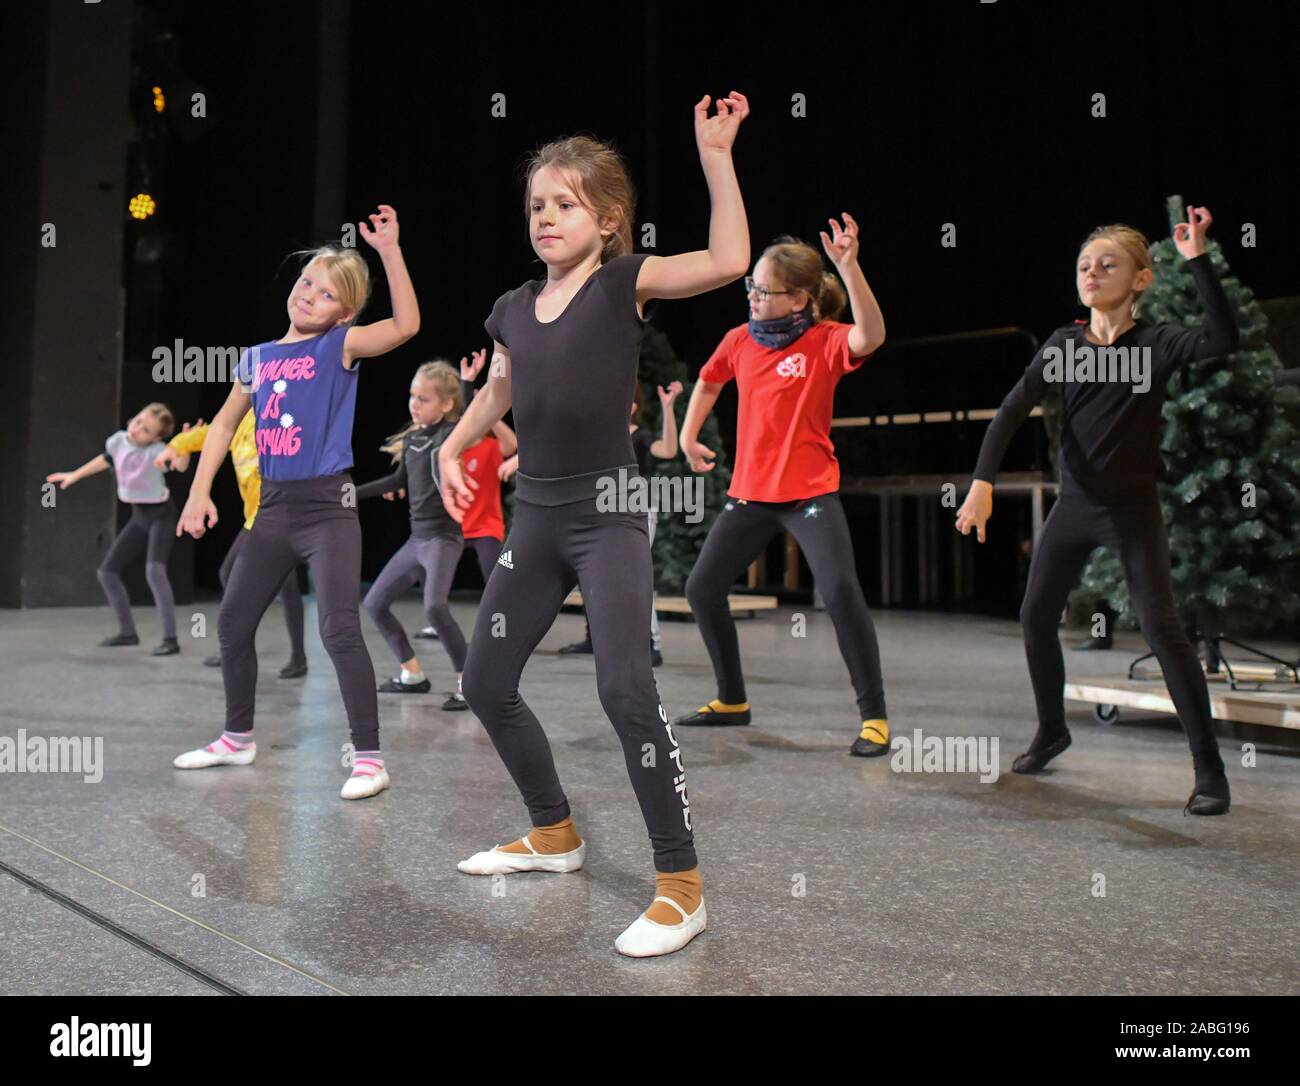 16 November 19 Brandenburg Eisenhuttenstadt Lay Actors Dance During A Rehearsal For The Play Snowy On Stage In The Friedrich Wolf Theater A Clumsy But Lovable Snowman Is The Star Of The Children In